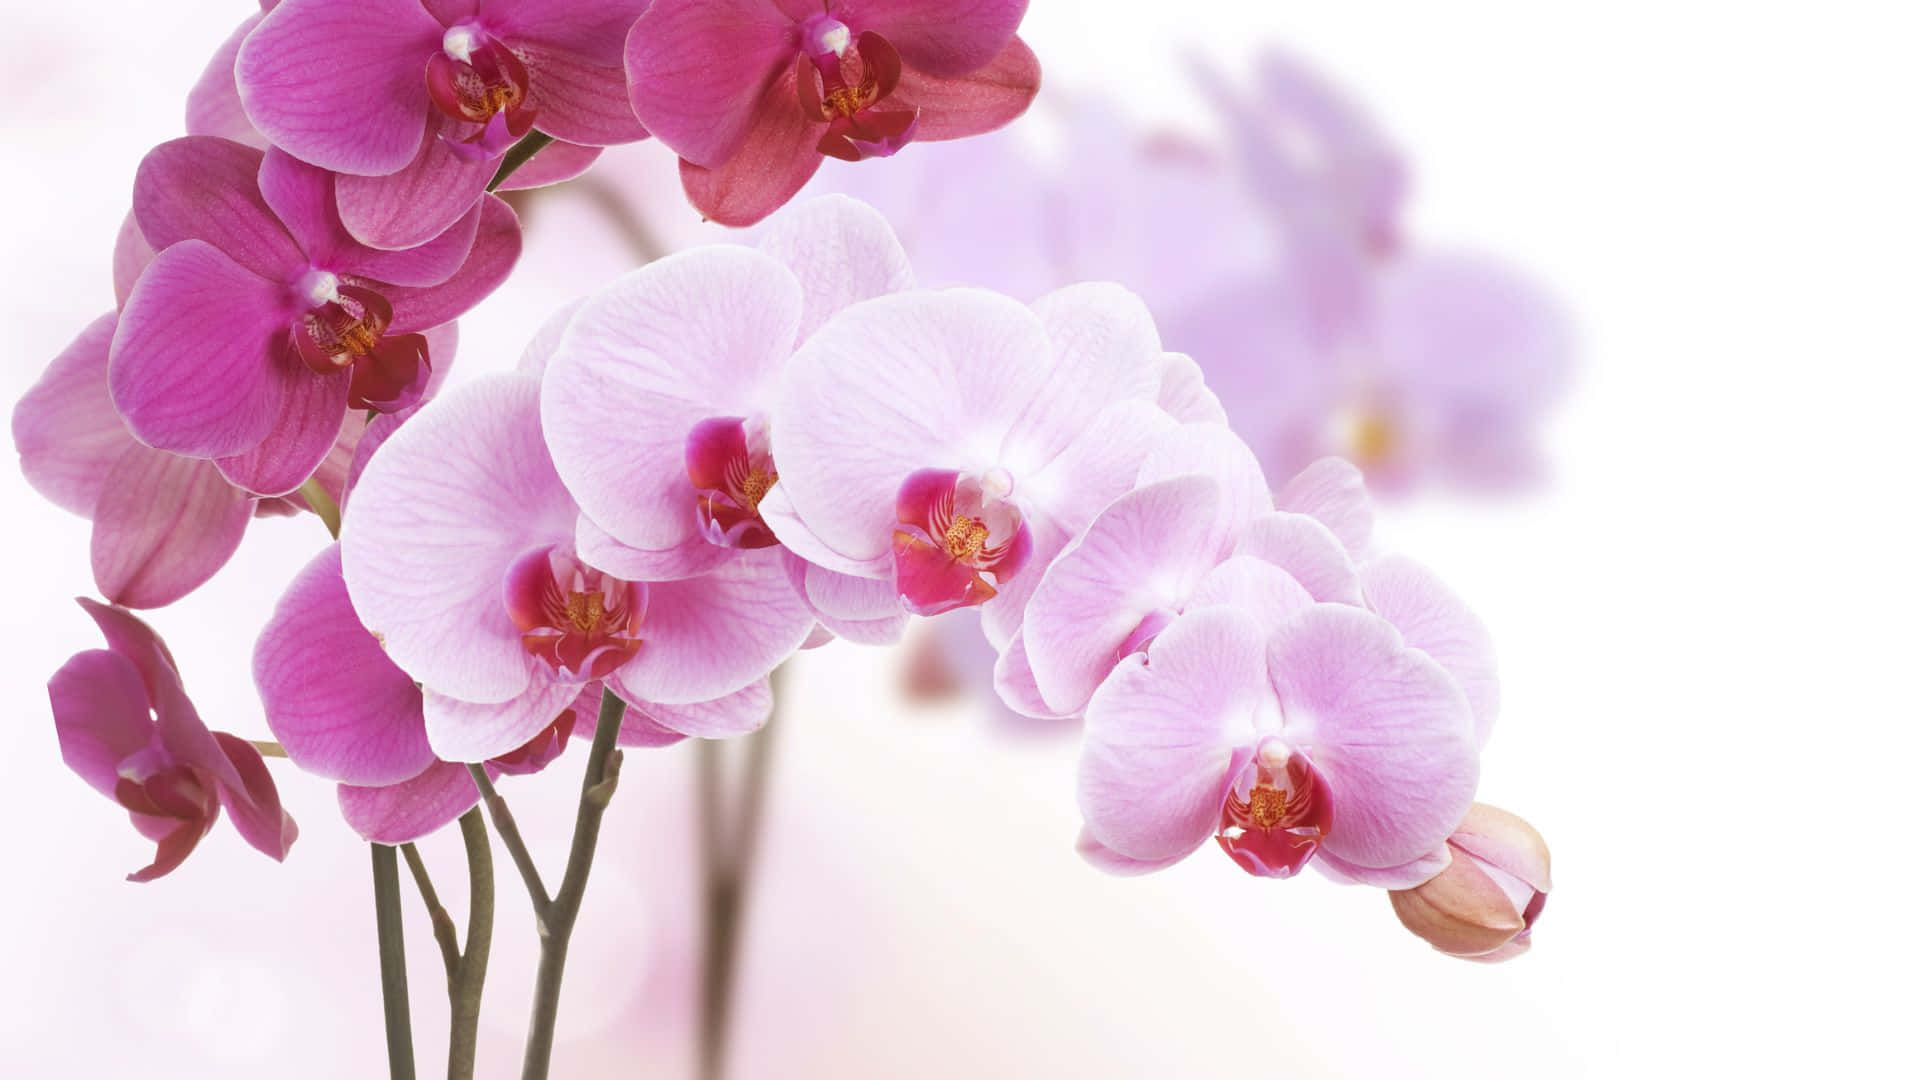 Colorful Orchids Arrangement - Bright and Beautiful